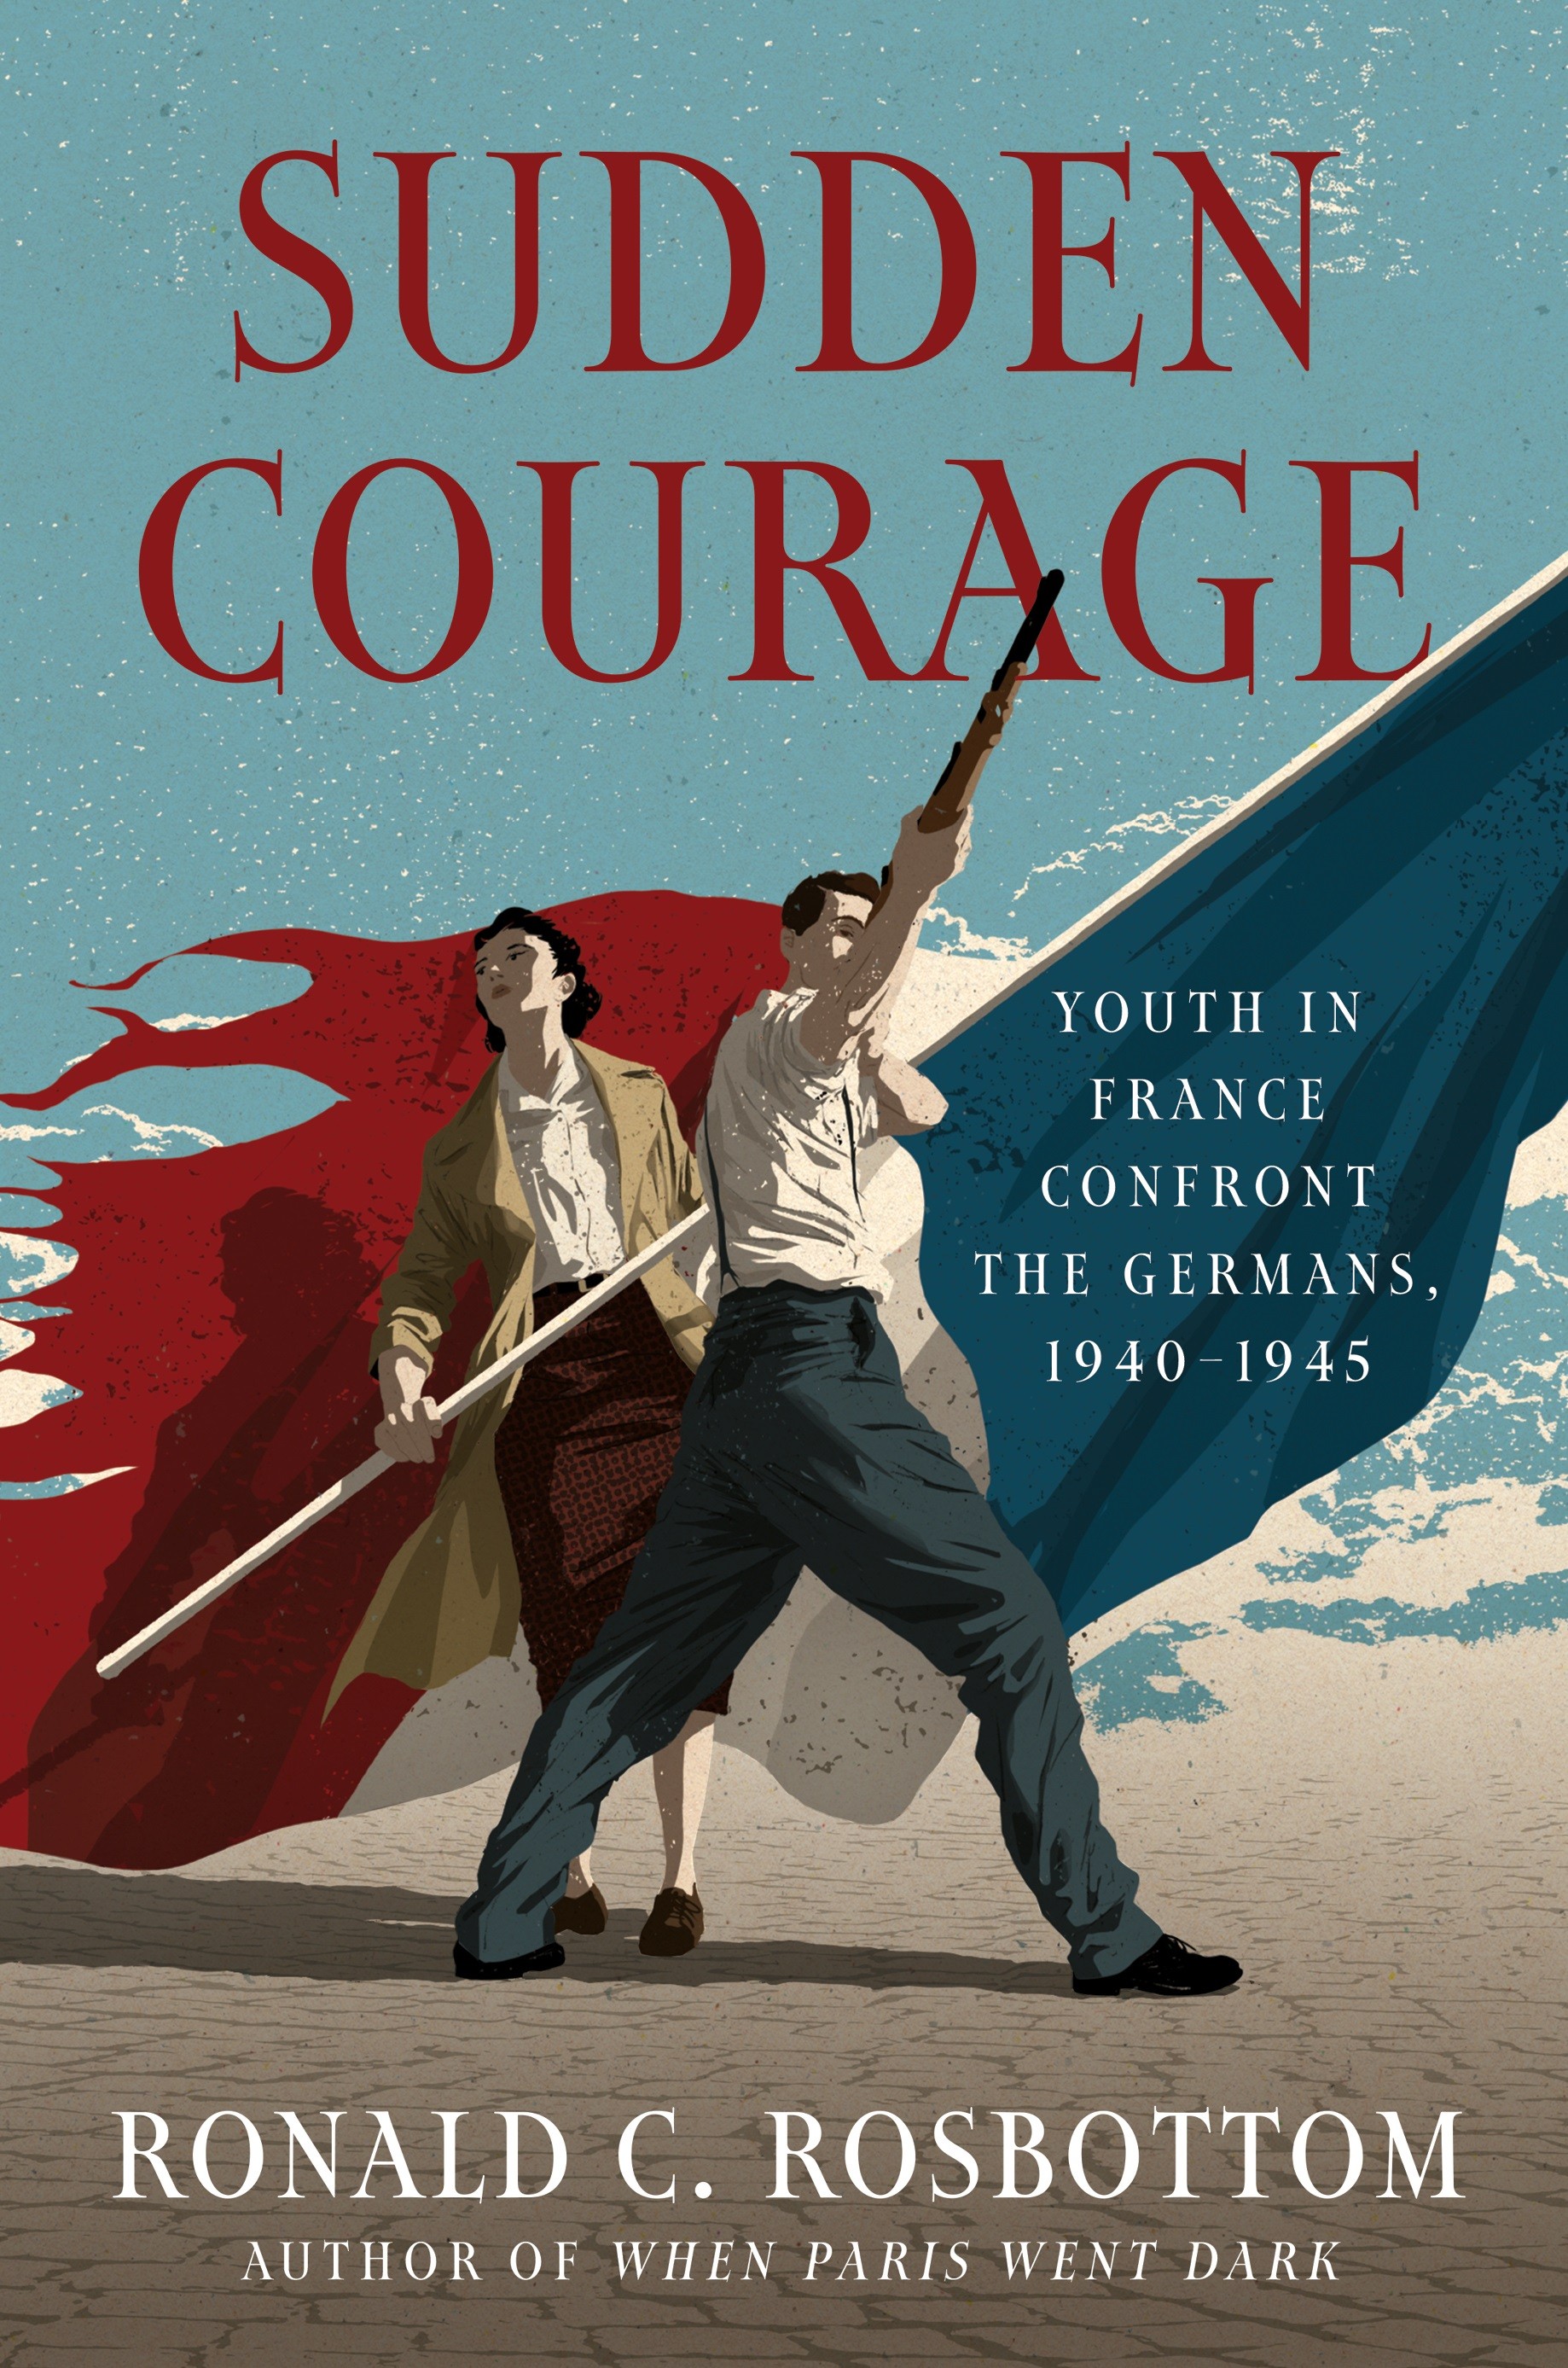 book cover with young people and french flag